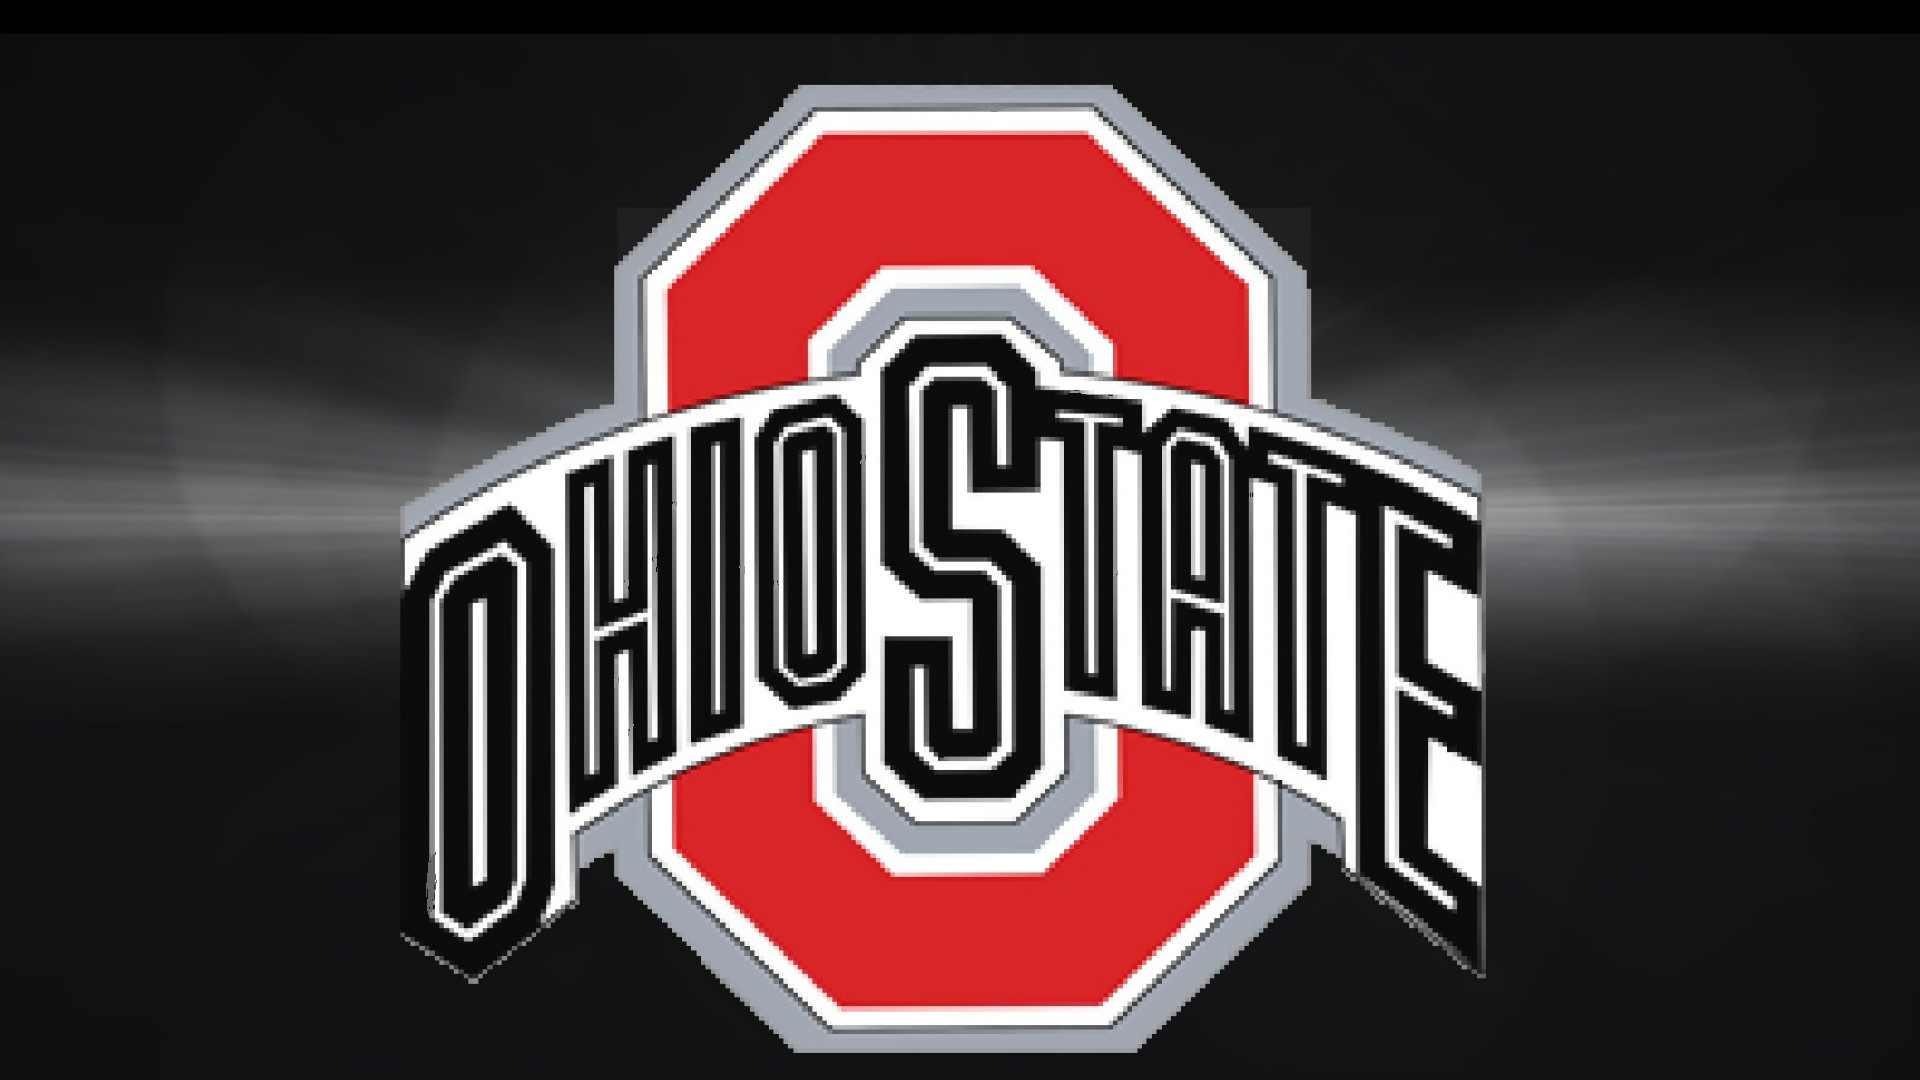 1920x1080 Ohio State Buckeyes images RED BLOCK O ON GRAY & BLACK HD wallpaper and  background photos